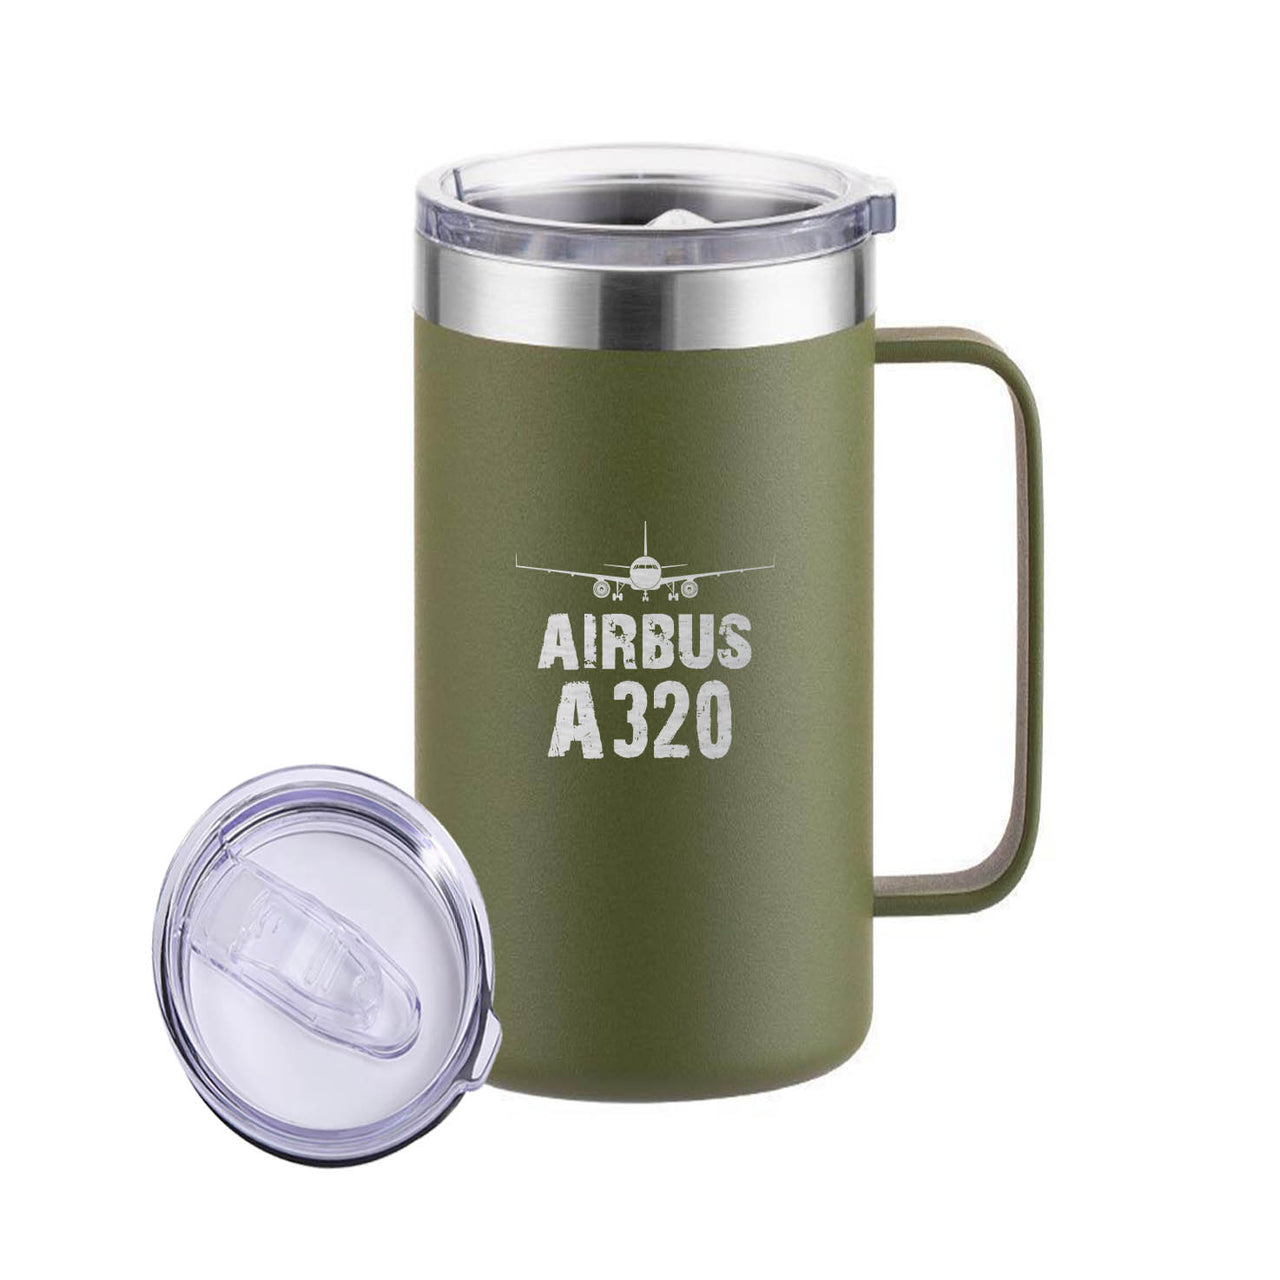 Airbus A320 & Plane Designed Stainless Steel Beer Mugs